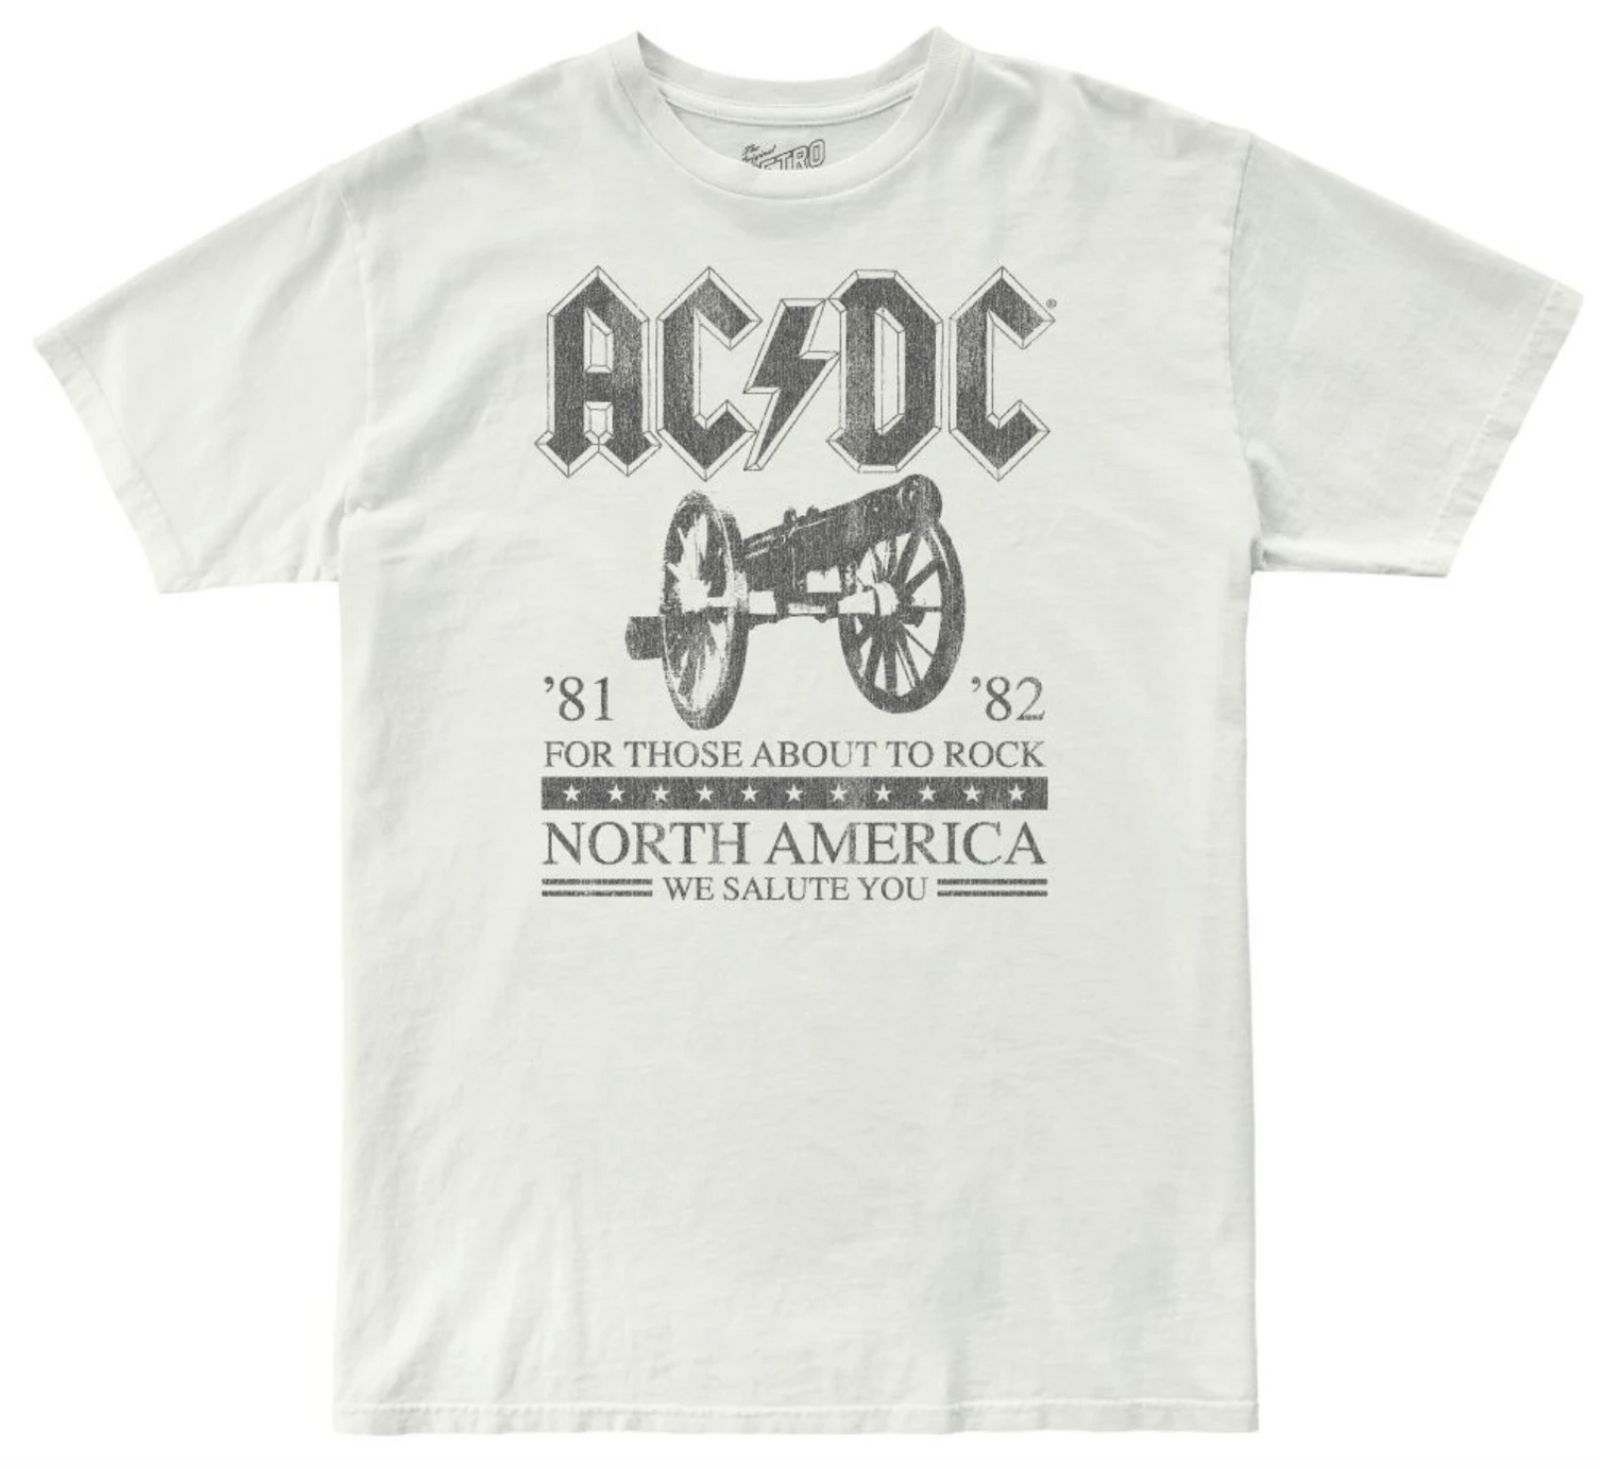 AC/DC 81-82 For Those About To Rock North America We Salute You with cannon graphic in faded black on our 100% cotton tee in white